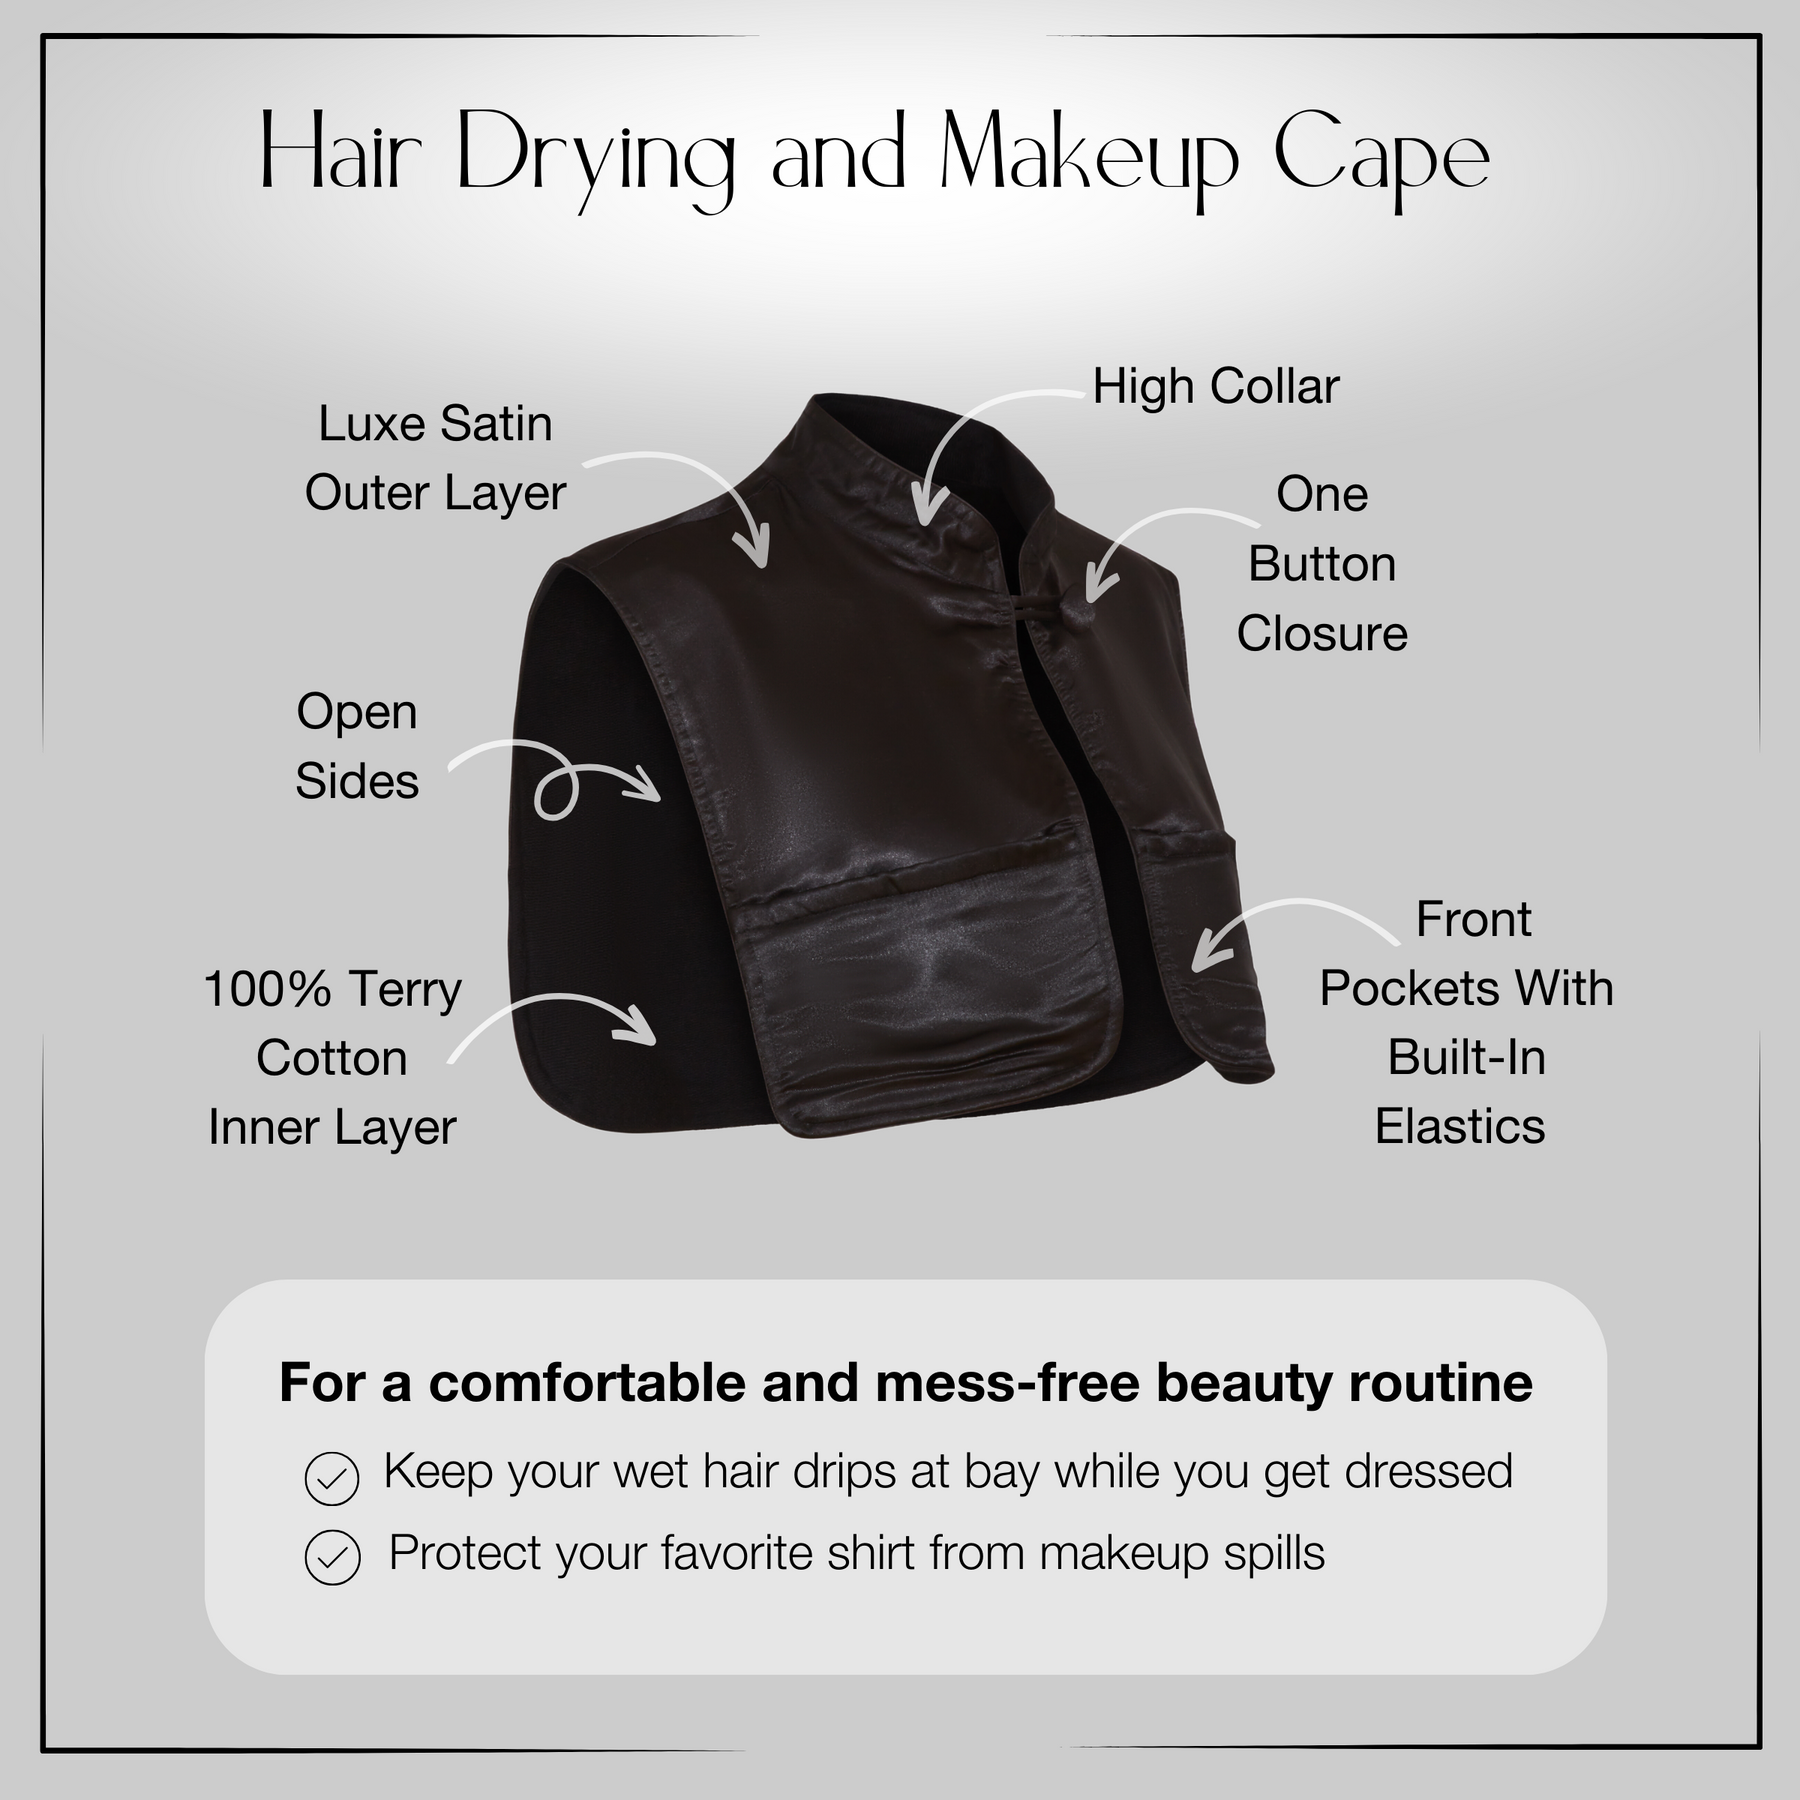 Monii Hair Drying and Makeup Cape, Black Satin